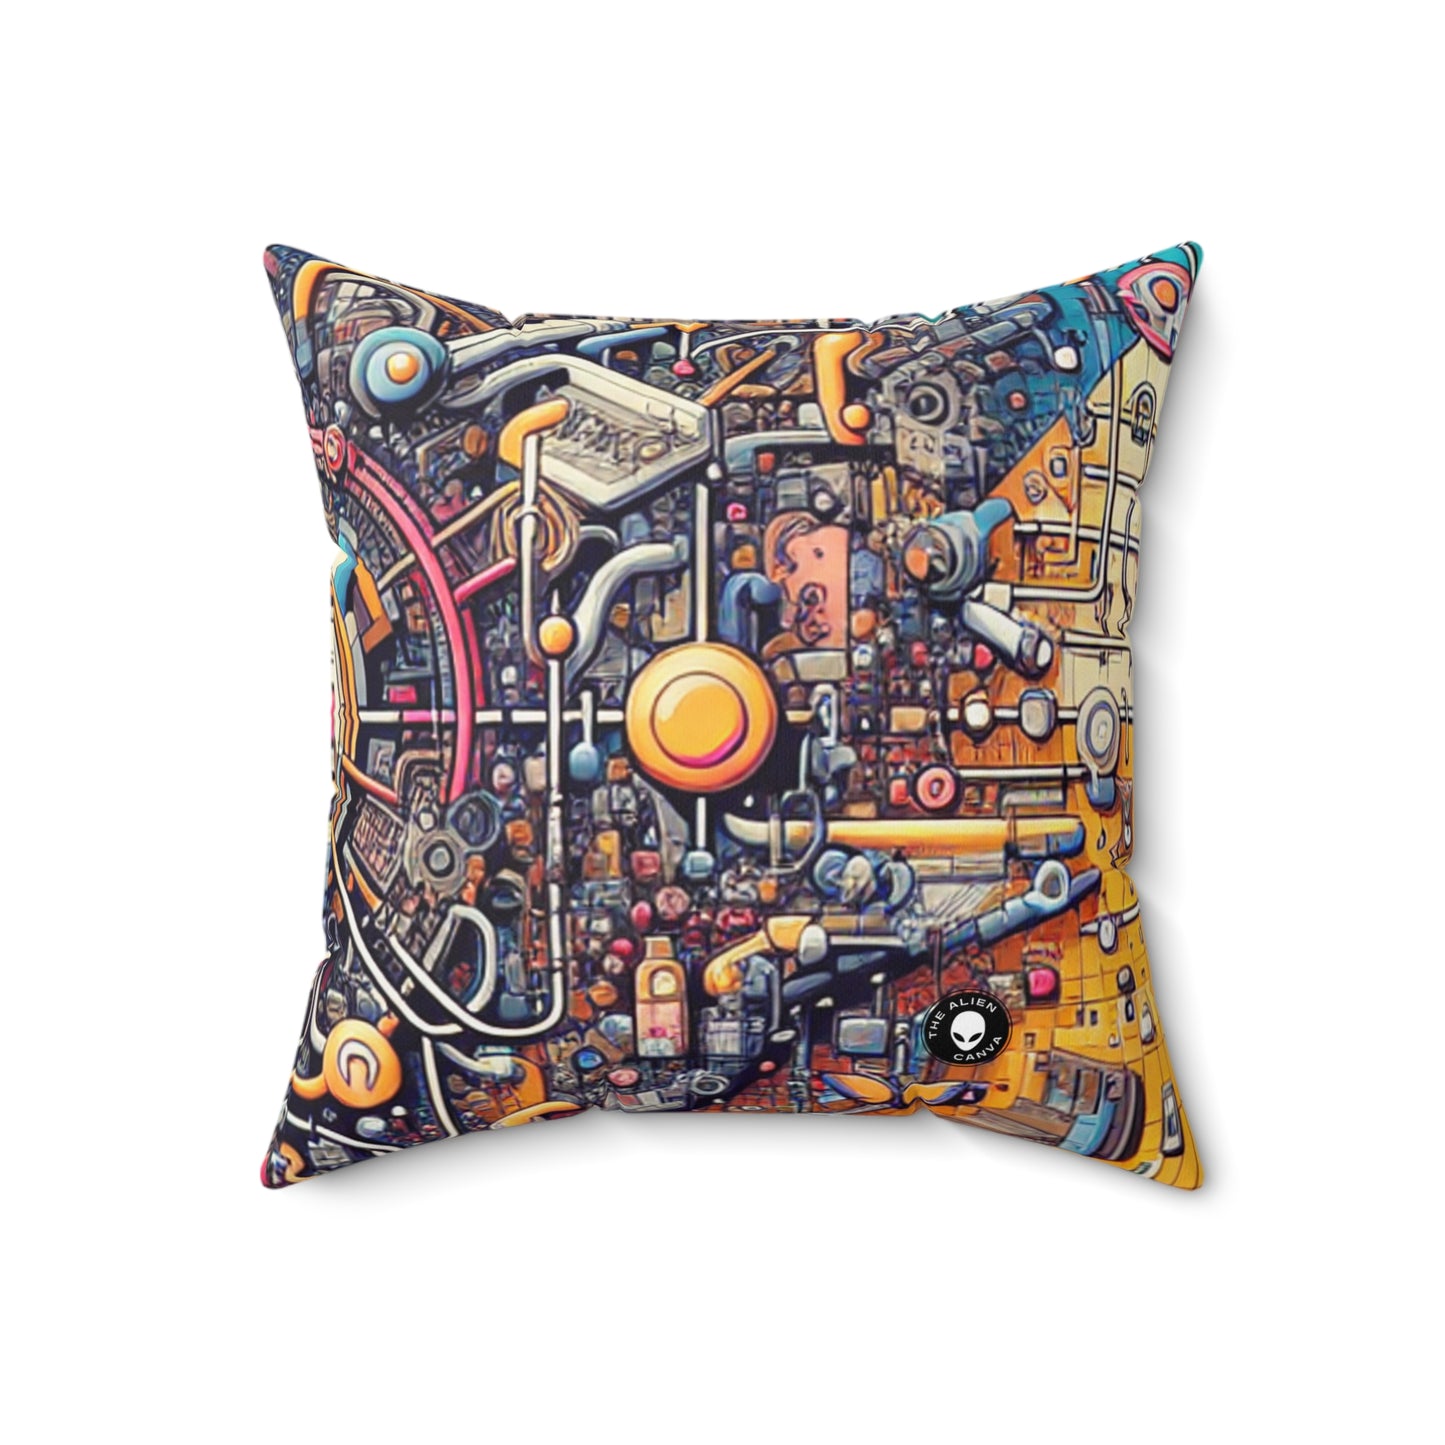 "Connection Points: Exploring Human Interactions in Public Spaces"- The Alien Spun Polyester Square Pillow Relational Art